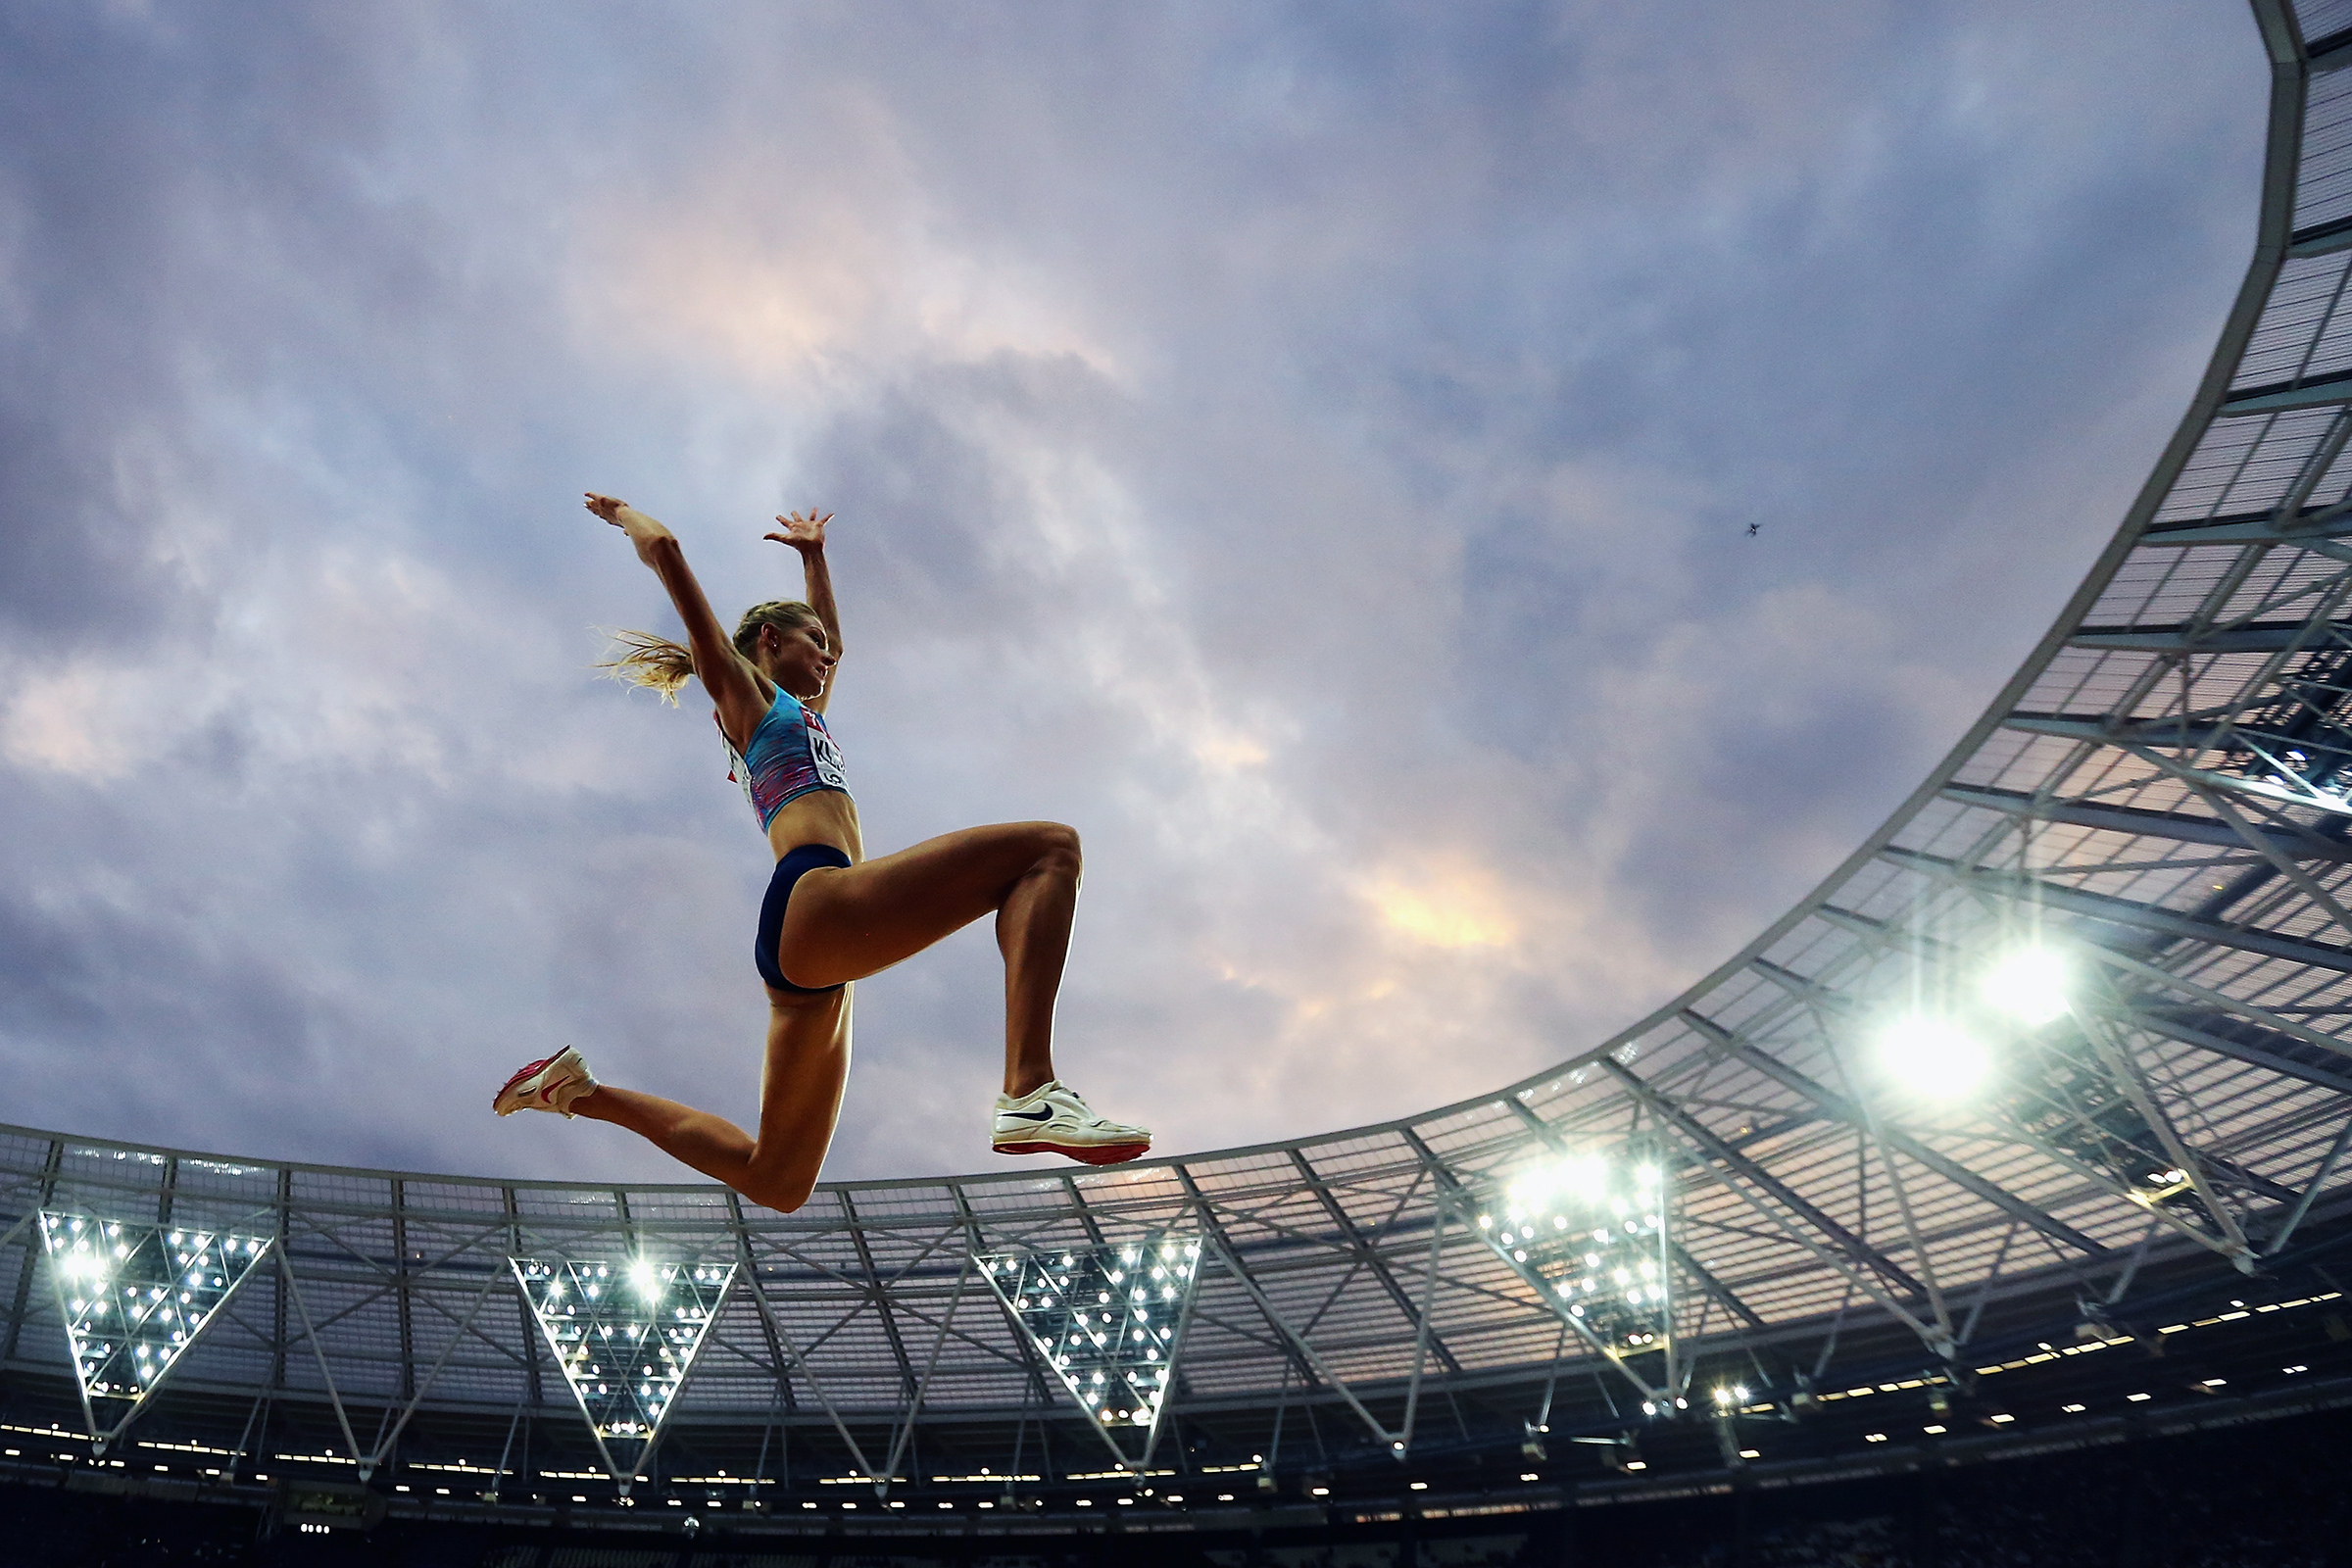 Darya Klishina of the Authorised Neutral Athletes, competes in the Women's Long Jump final during day eight of the 16th IAAF World Athletics Championships London 2017 at The London Stadium on August 11, 2017 in London, United Kingdom. (Alexander Hassenstein—Getty Images)